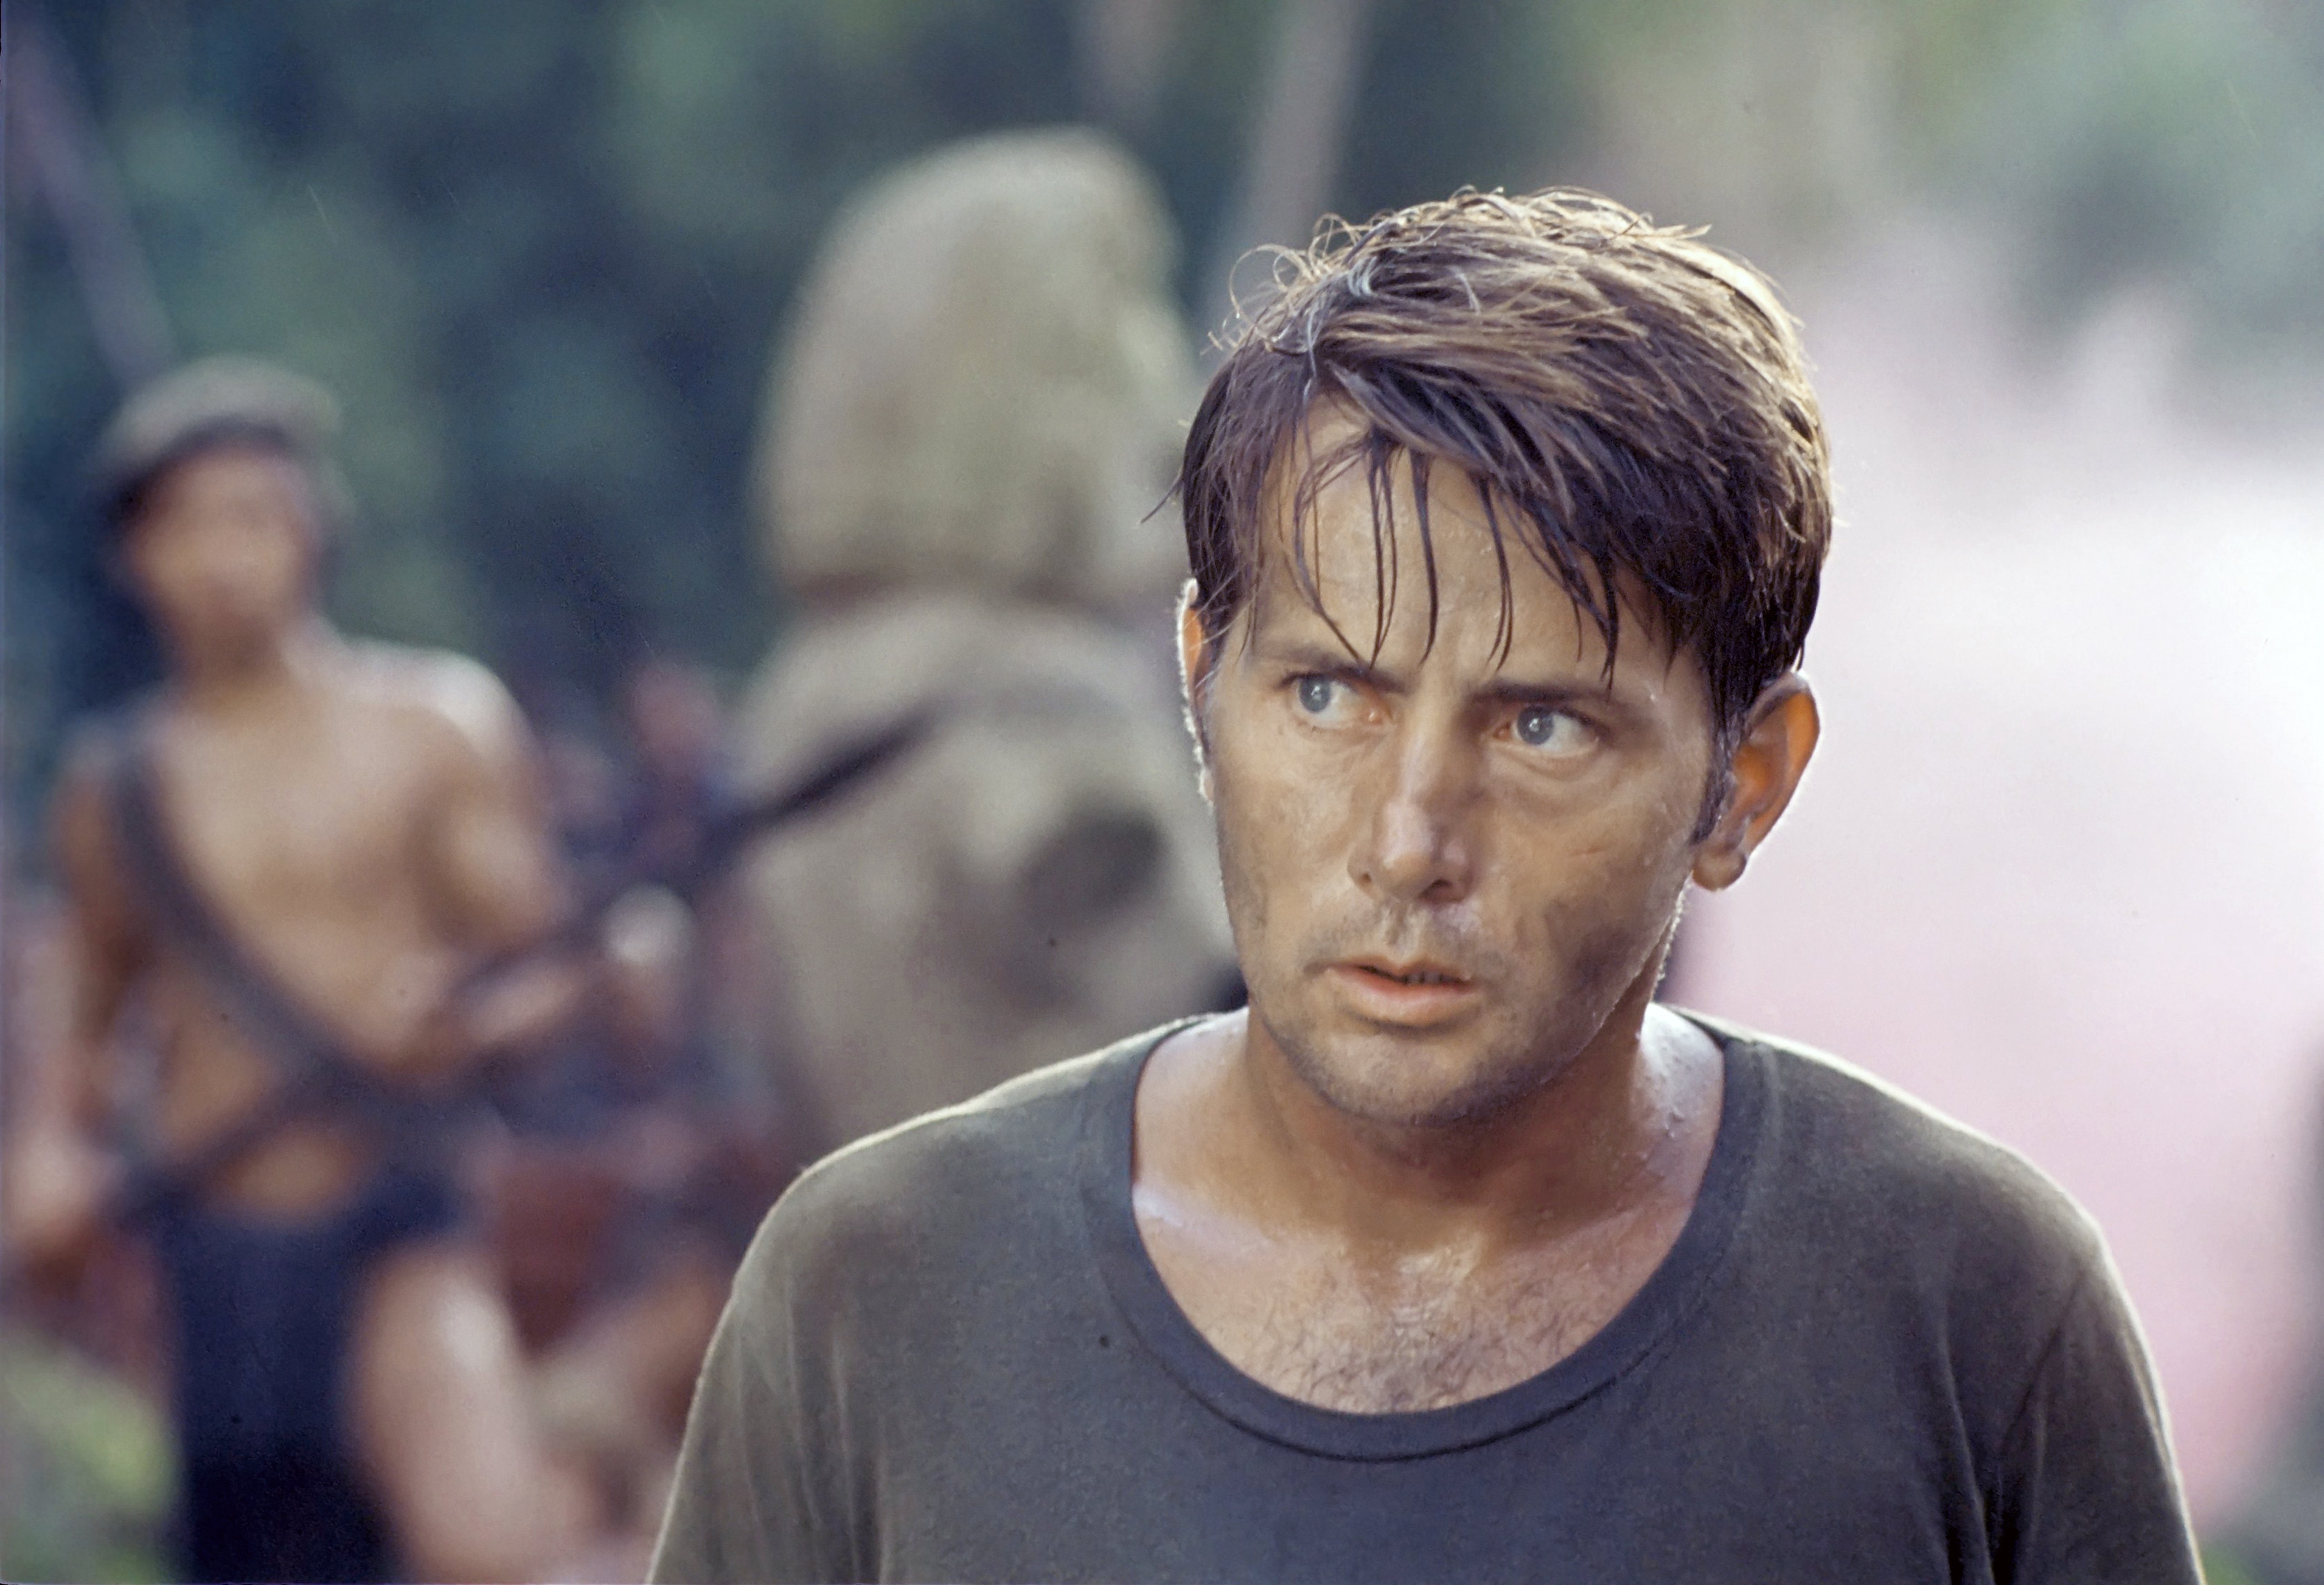 Martin Sheen on the set of the 1979 film "Apocalypse Now"  | Source: Getty Images